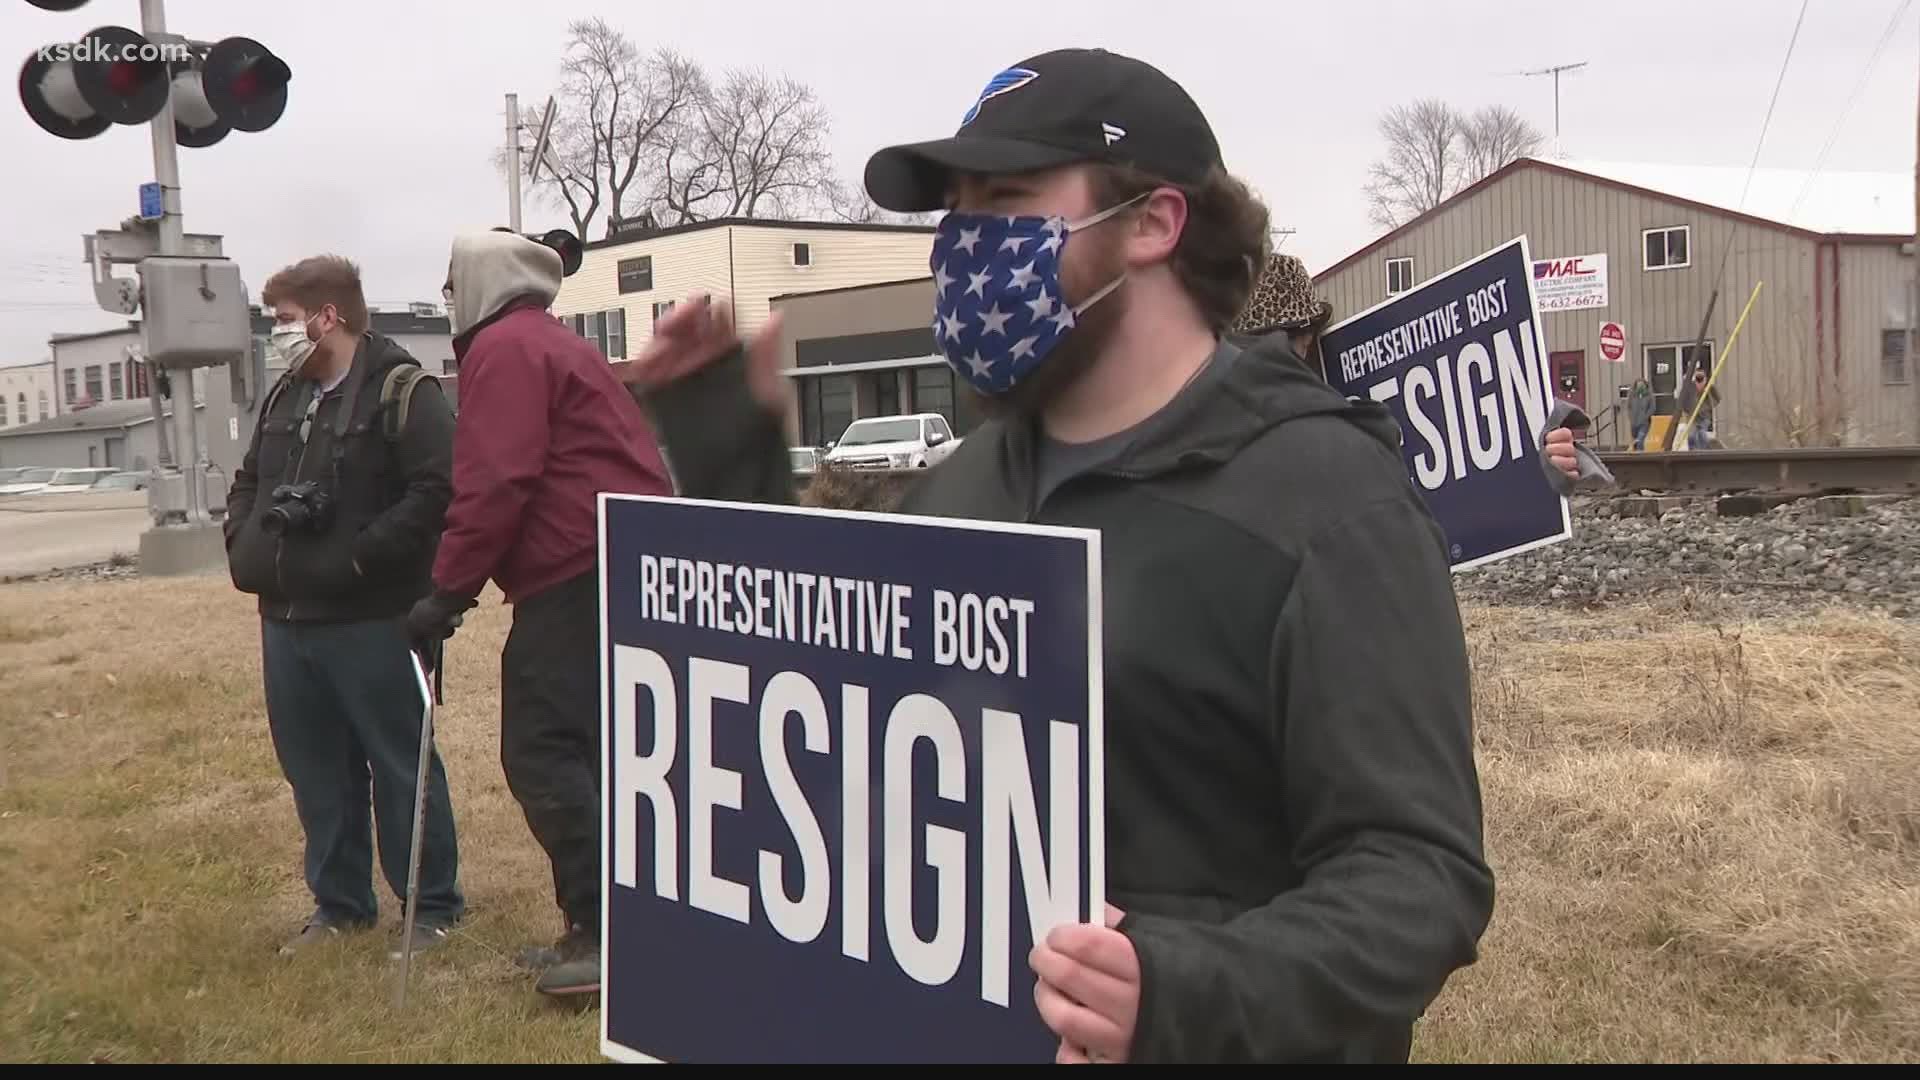 About two dozen protesters gathered on Saturday